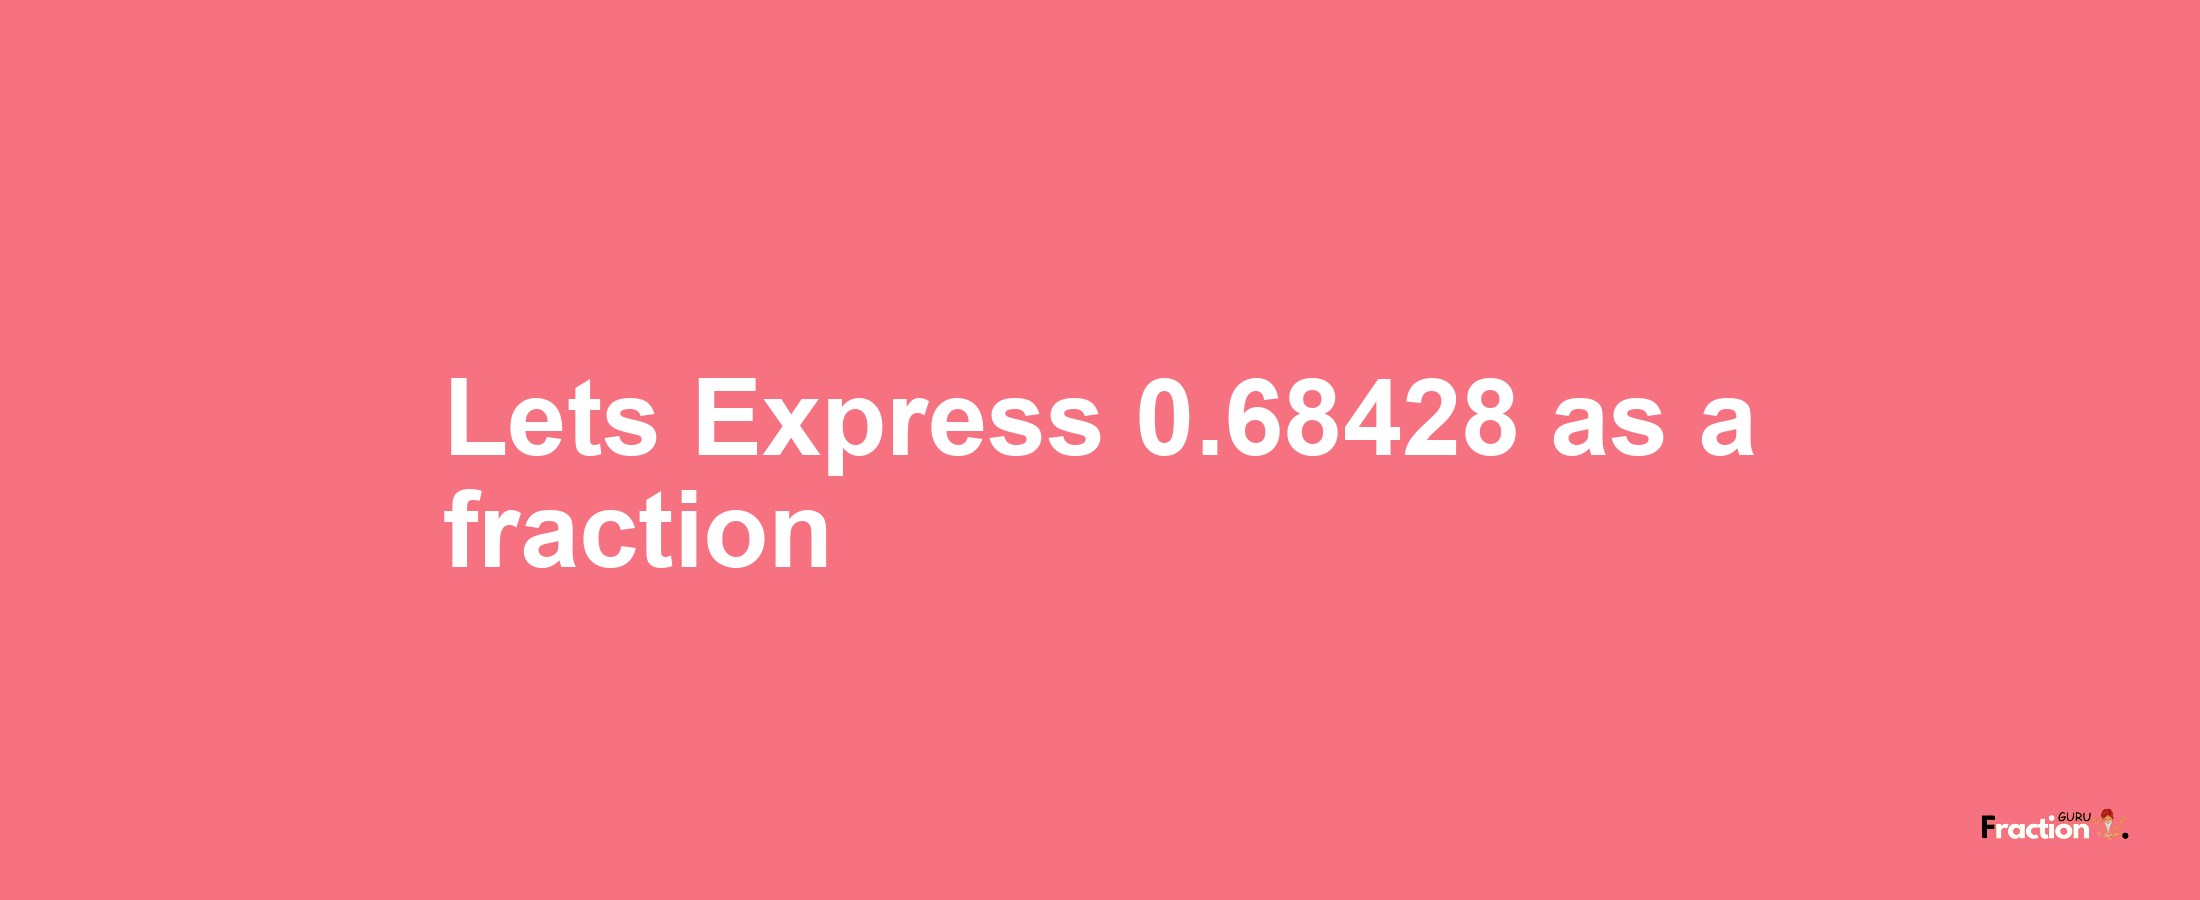 Lets Express 0.68428 as afraction